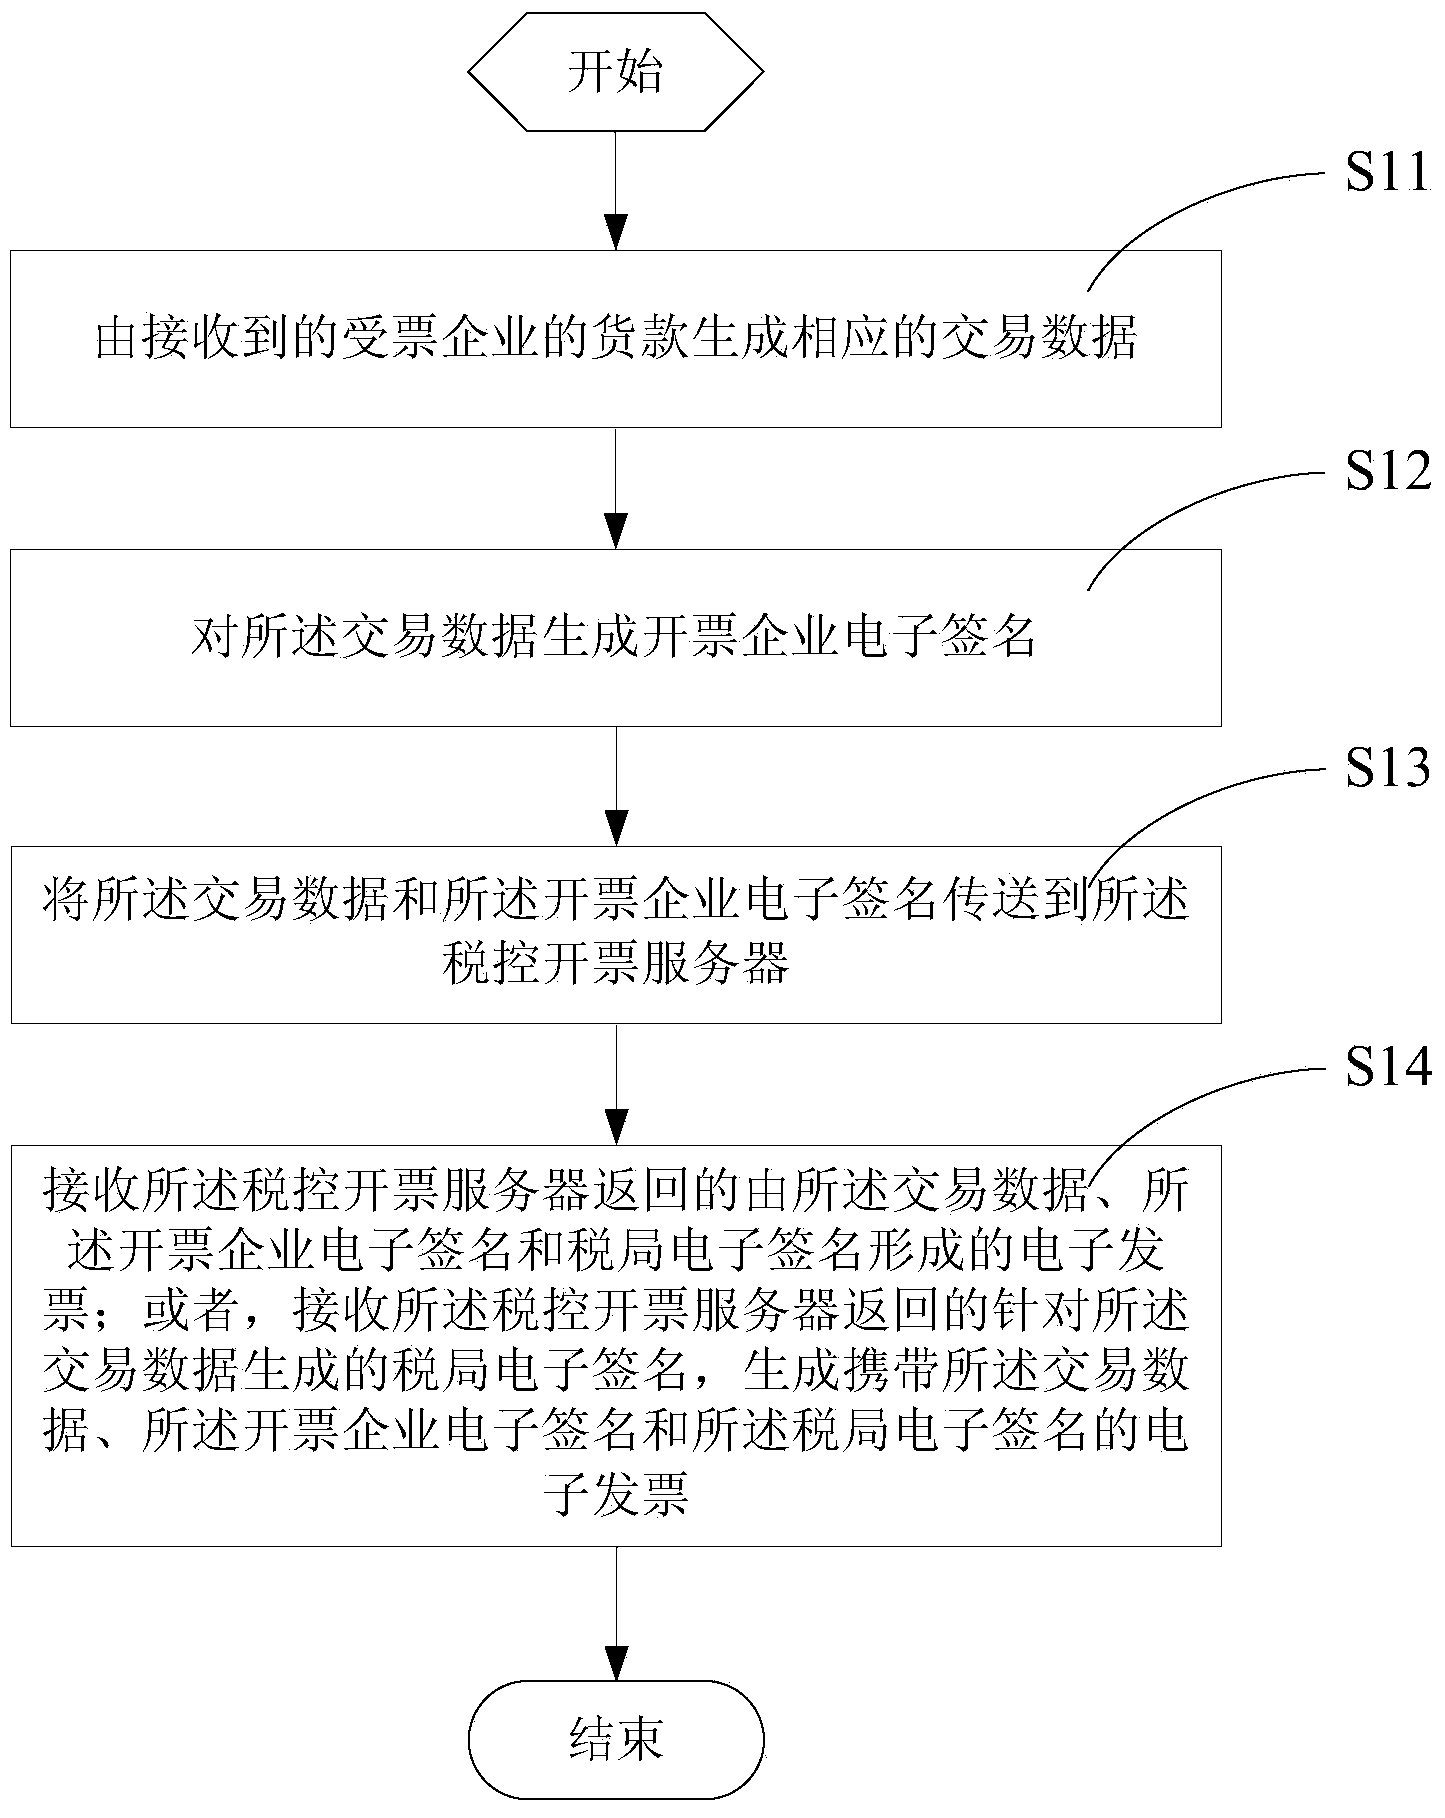 Electronic invoice generating method, device and system